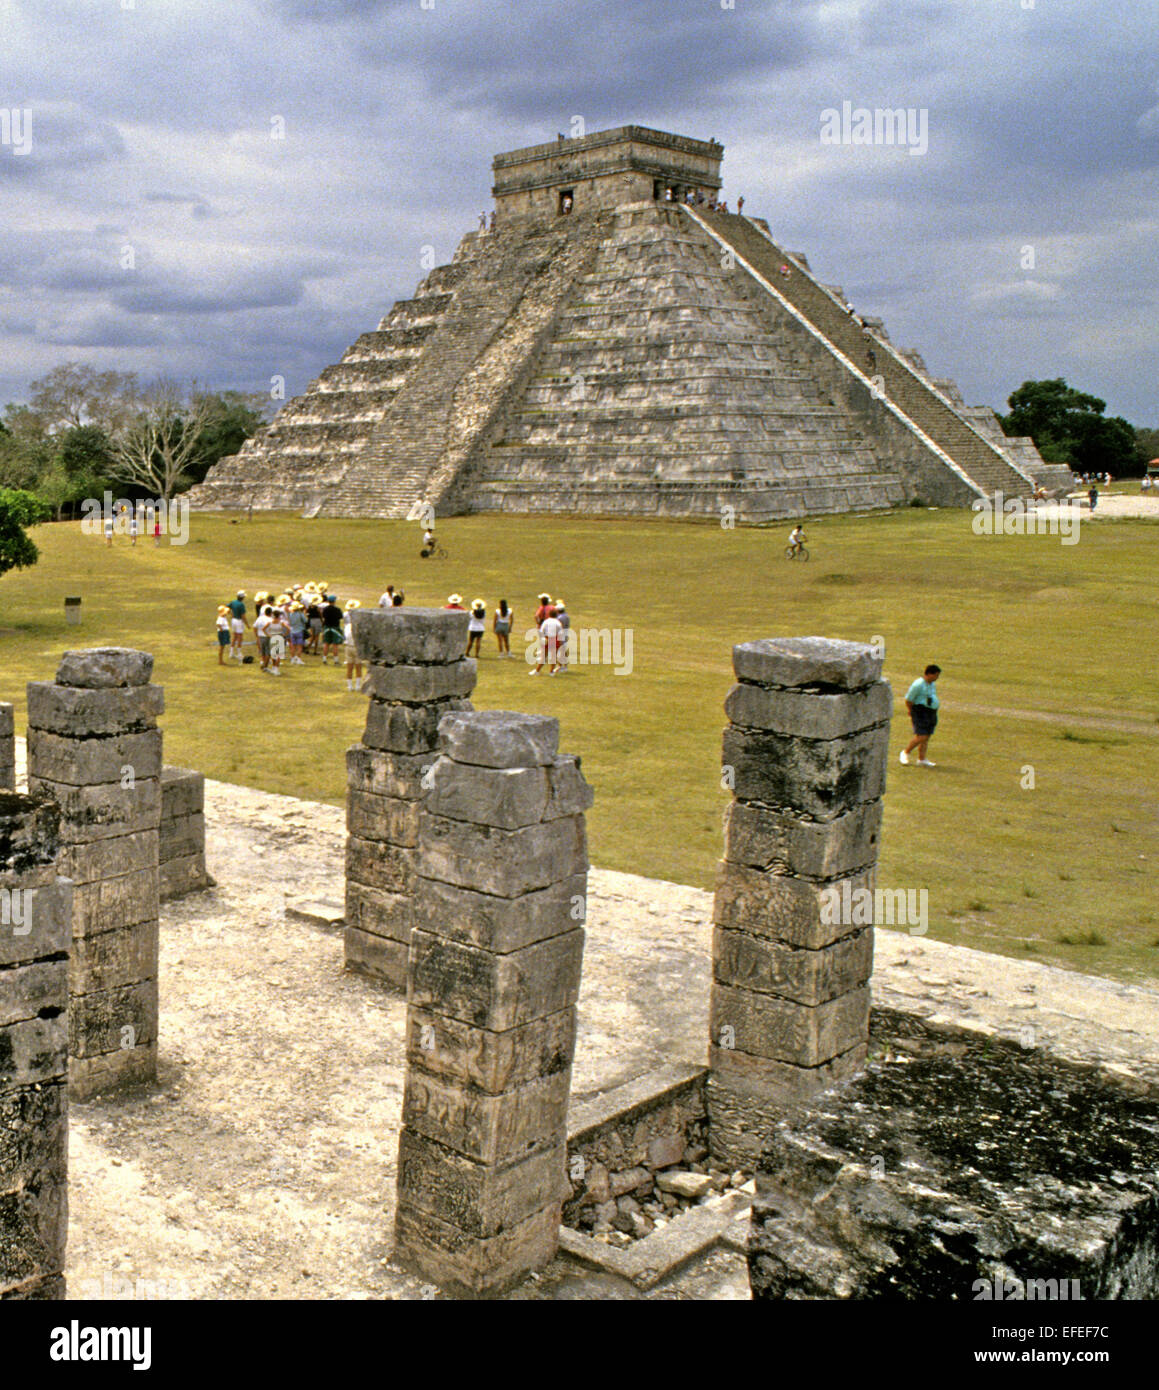 Mexico - Chichen Itza on of the best known sites. with well preserved and restorded buildings This is the famous view of the Castillo across the Thousand Columns from the Temple of the Warriors Stock Photo